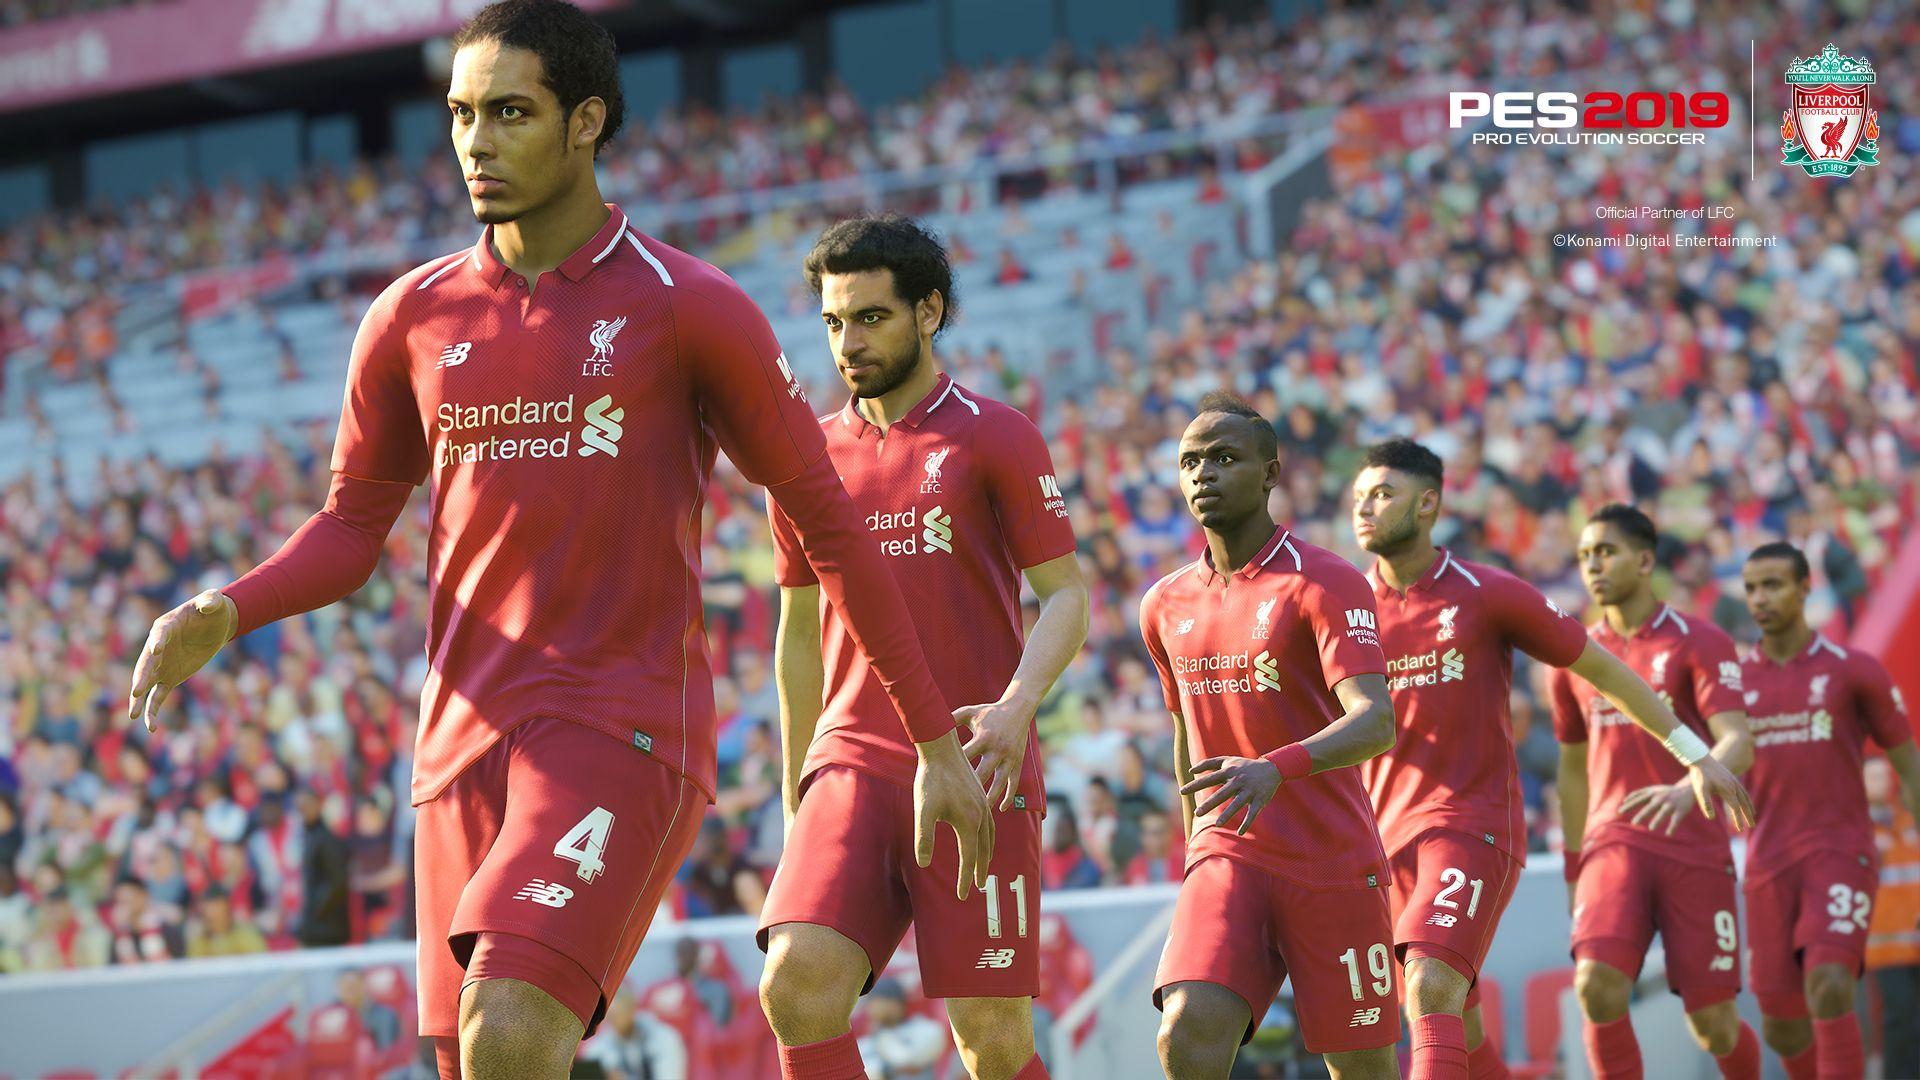 PES 2019 Demo Set for August New Club Details And Dropped